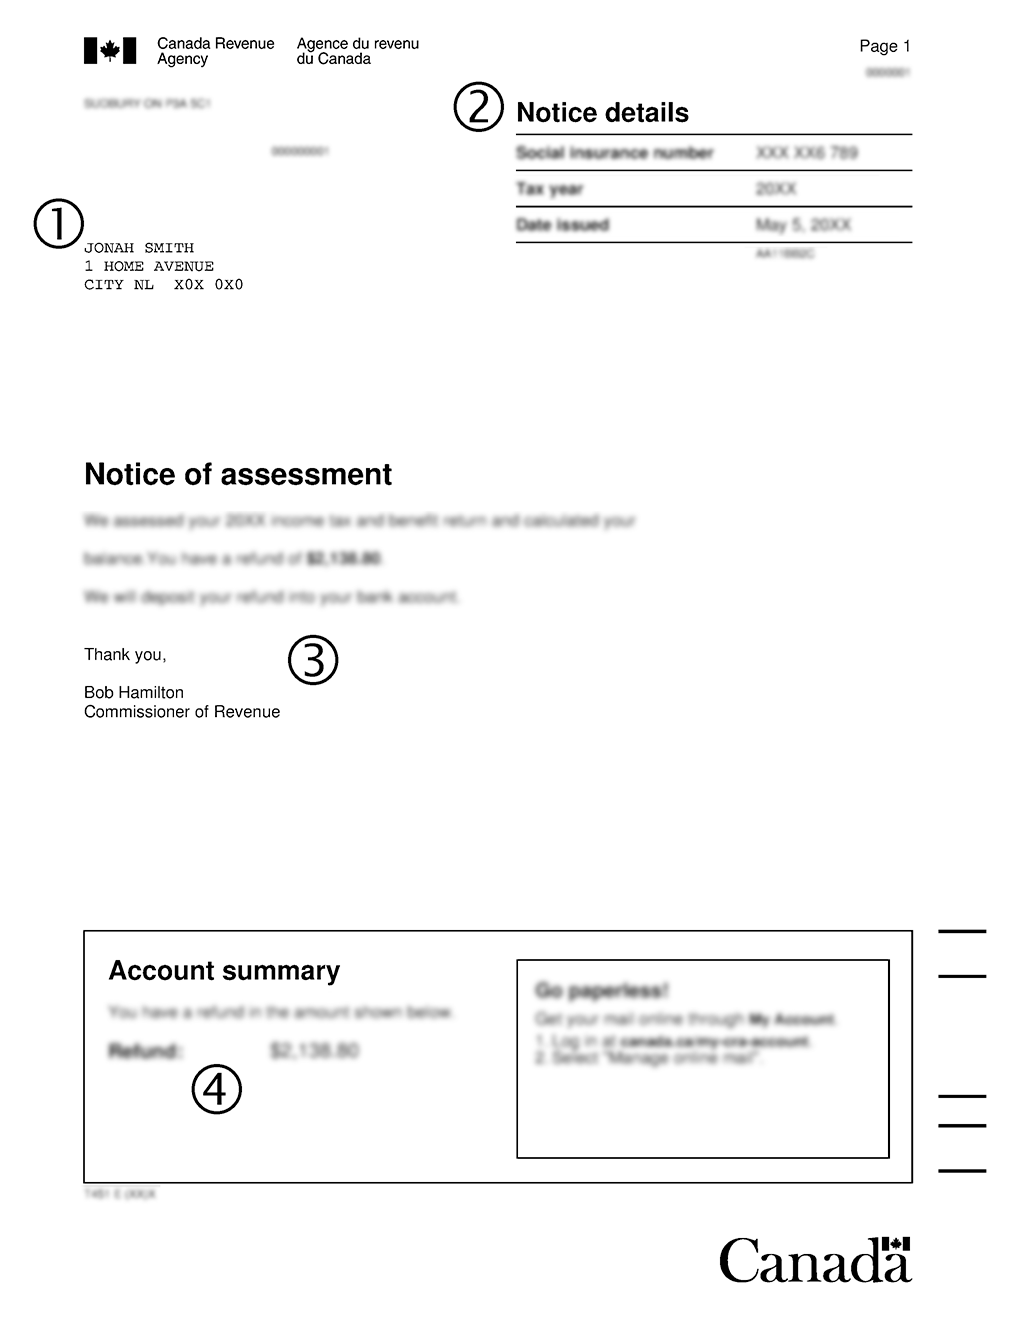 Page one of the notice of assessment, that contains notice details, such as your social insurance number, the tax year and the date of your notice, as well as an account summary.